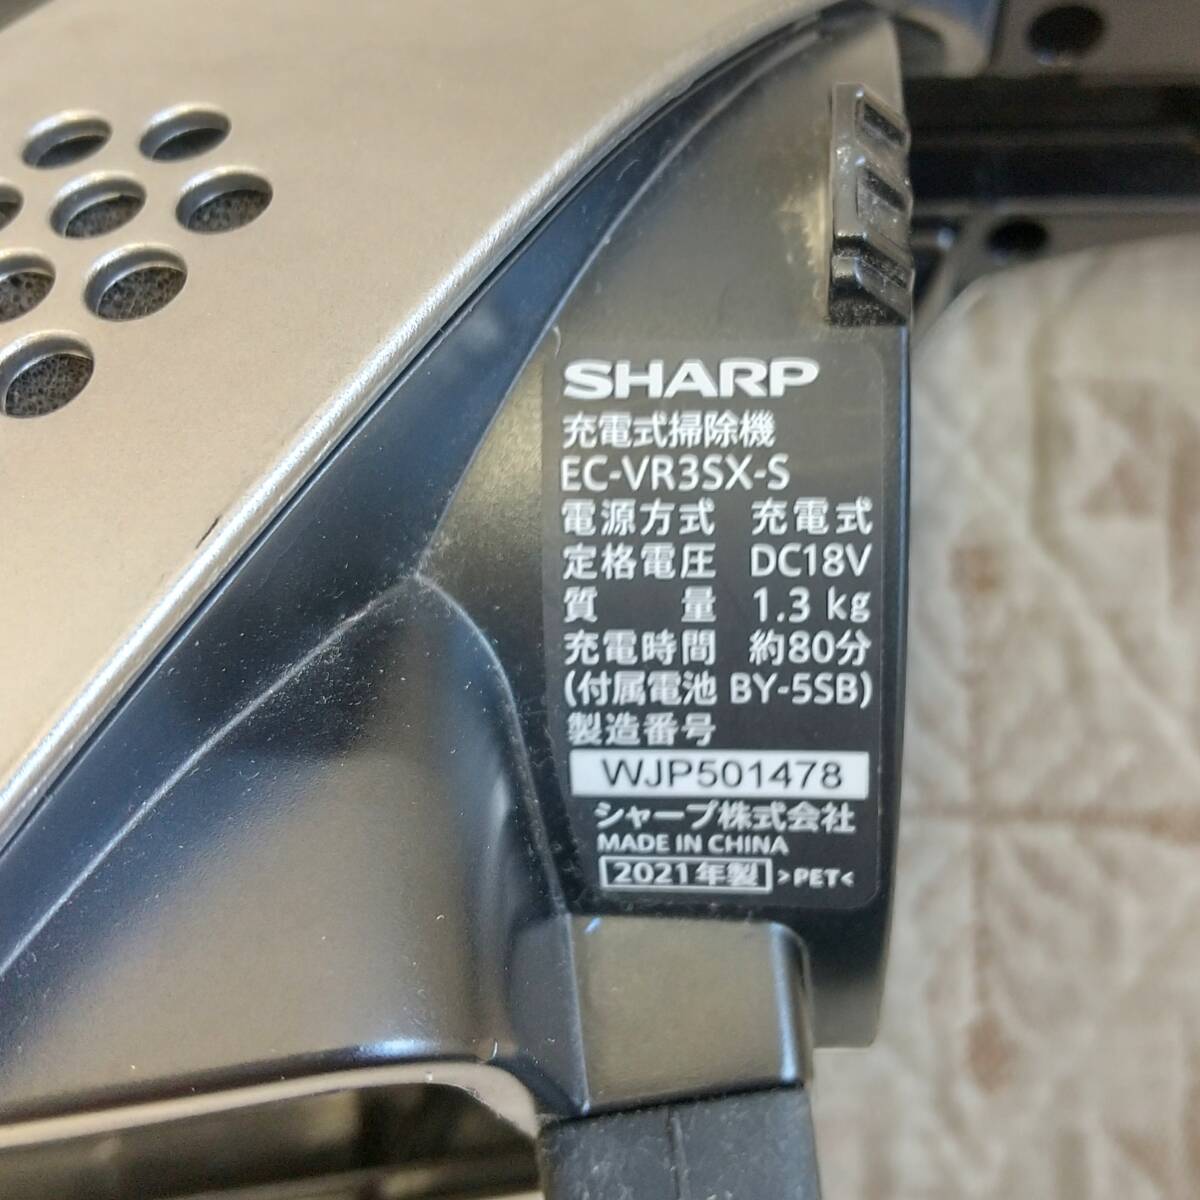 [778] secondhand goods sharp cordless cleaner EC-VR3SX-S 2021 year made box equipped 